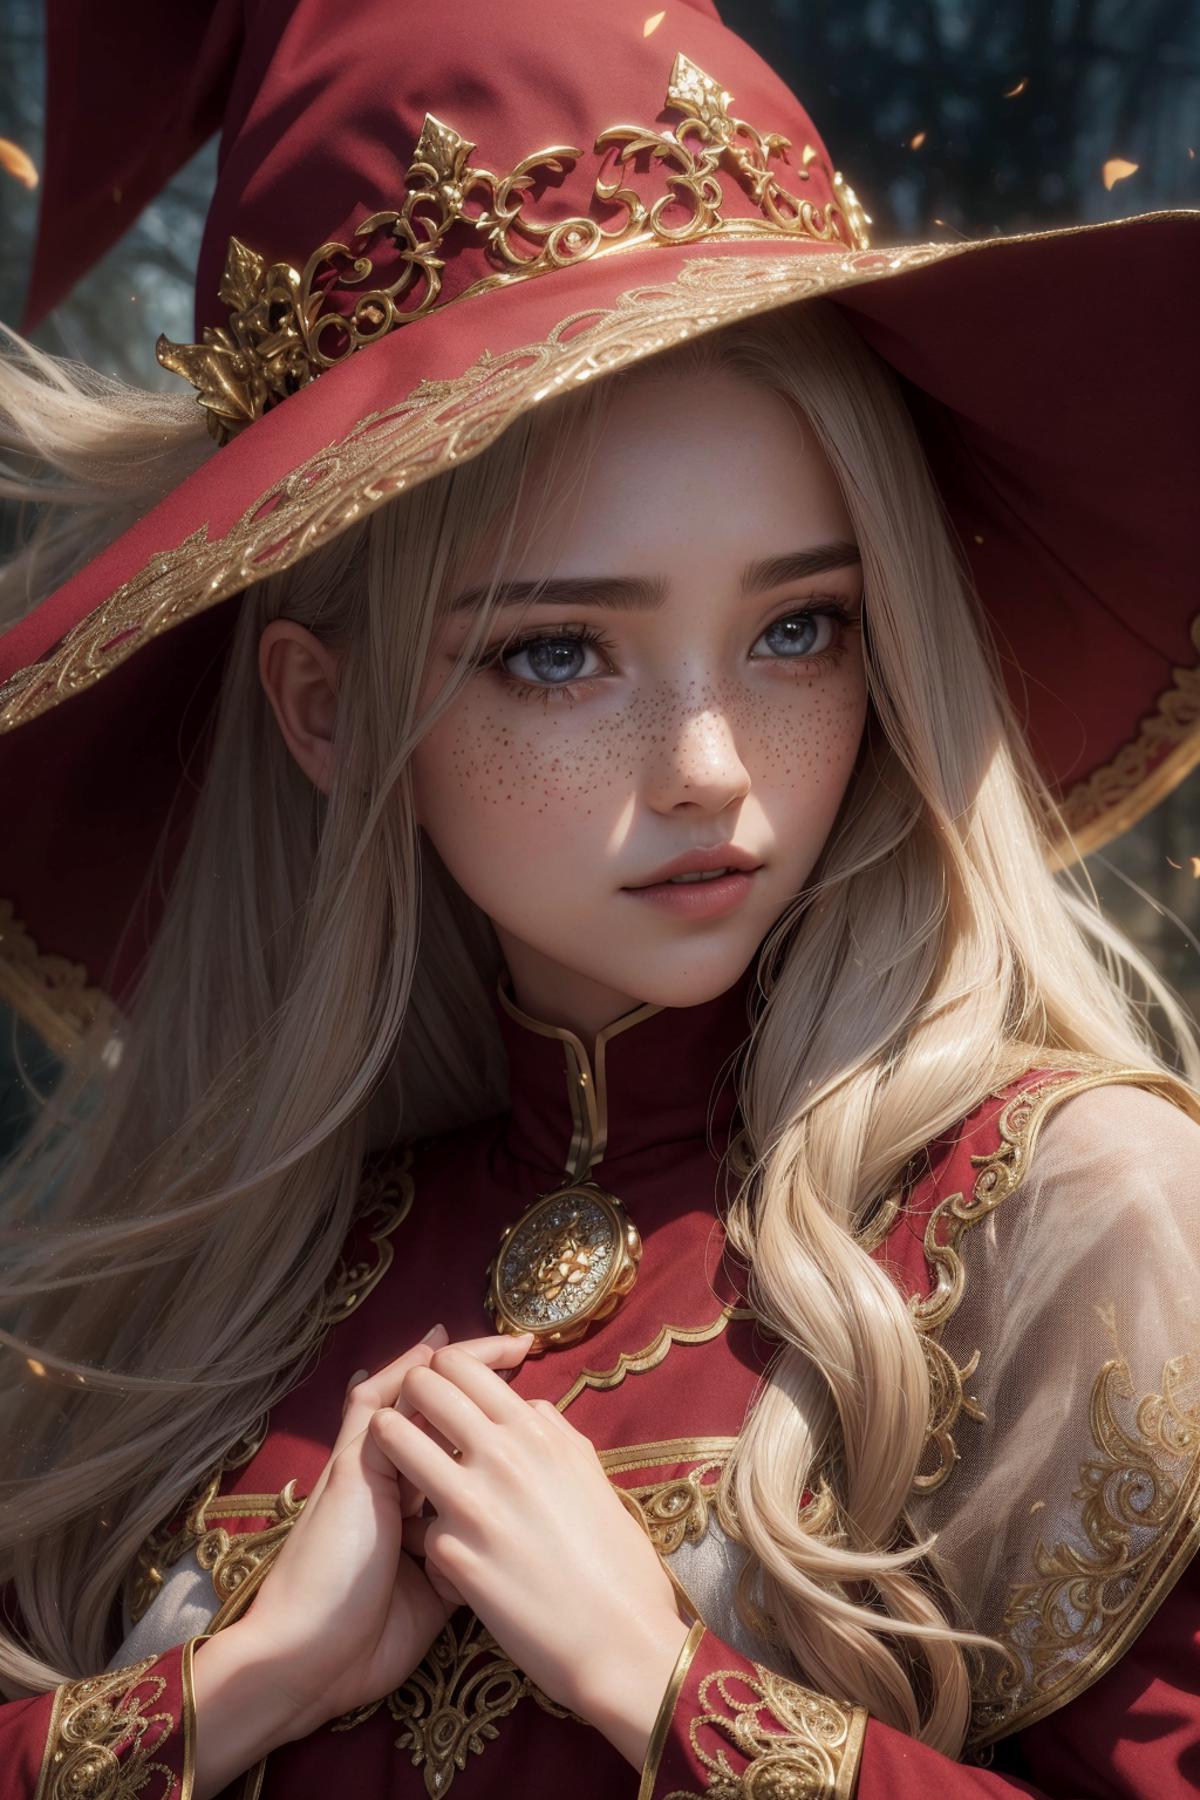 A beautiful blonde woman wearing a red hat, a red jacket, and a gold necklace.